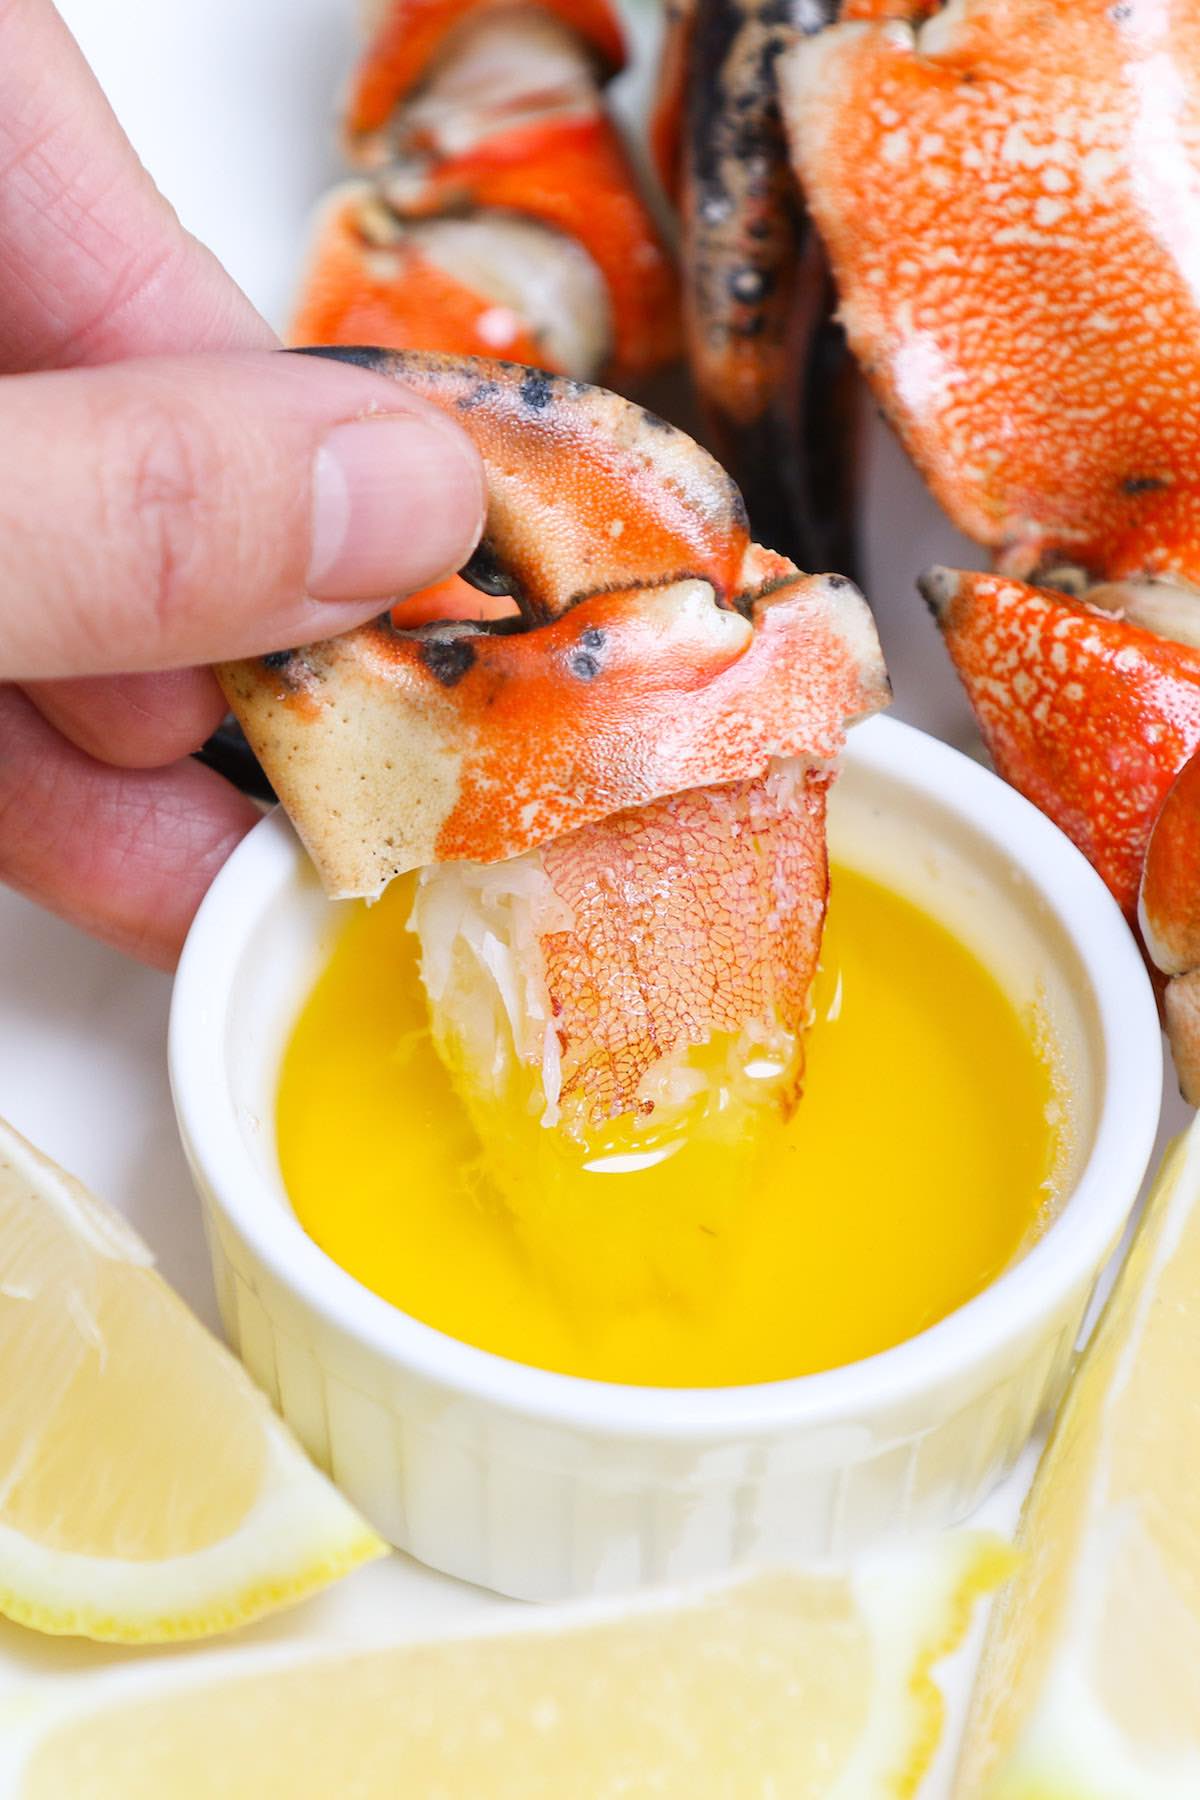 Dipping delicious crab meat into clarified butter with a sprinkle of fresh lemon juice